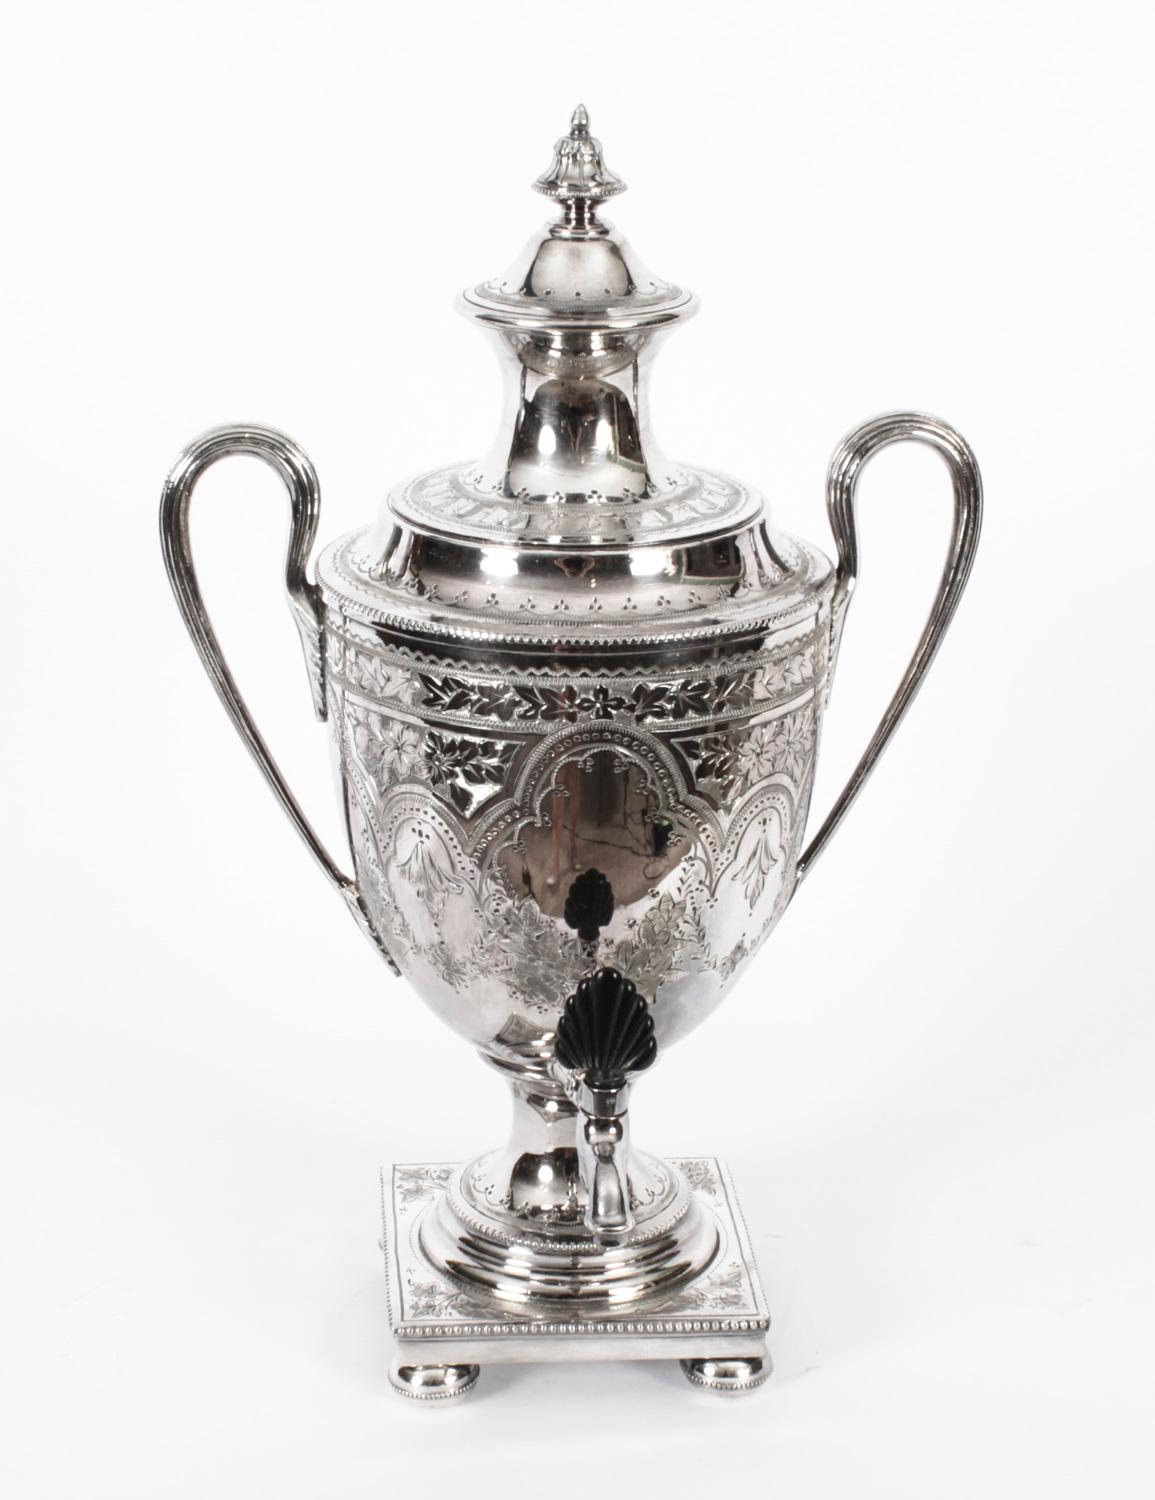 This is a wonderful antique silver plated Victorian Neo-classical Samovar, bearing the makers mark Pearce & Sons, circa 1880 in date.
 
It has beautiful embossed floral decoration on the baluster form body with a detachable cover and tea